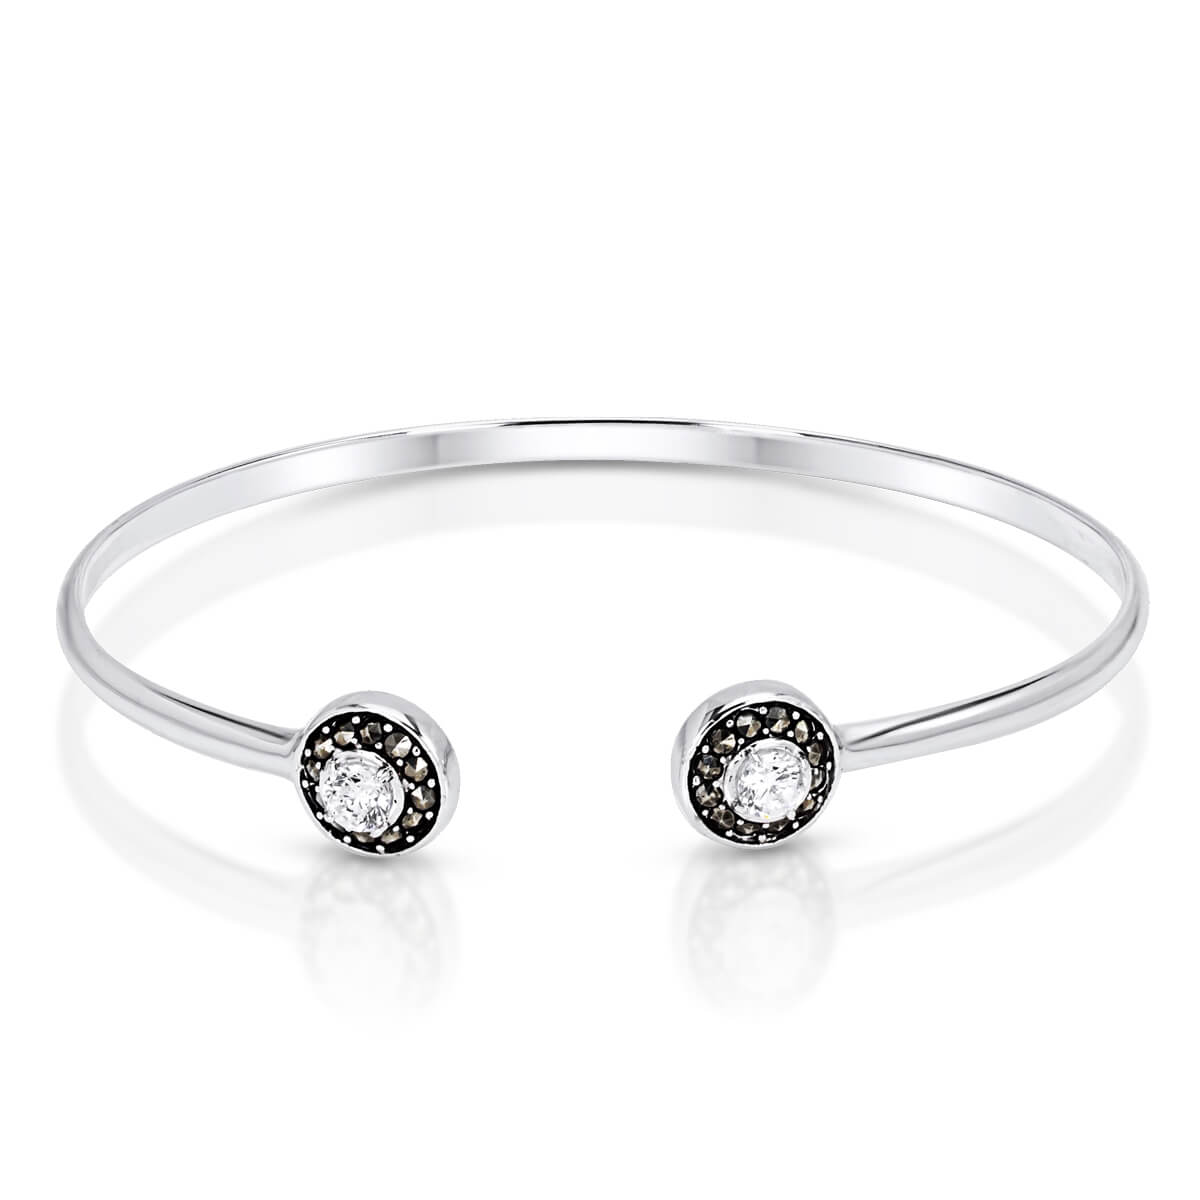 Bangle with CZ & Marcasite